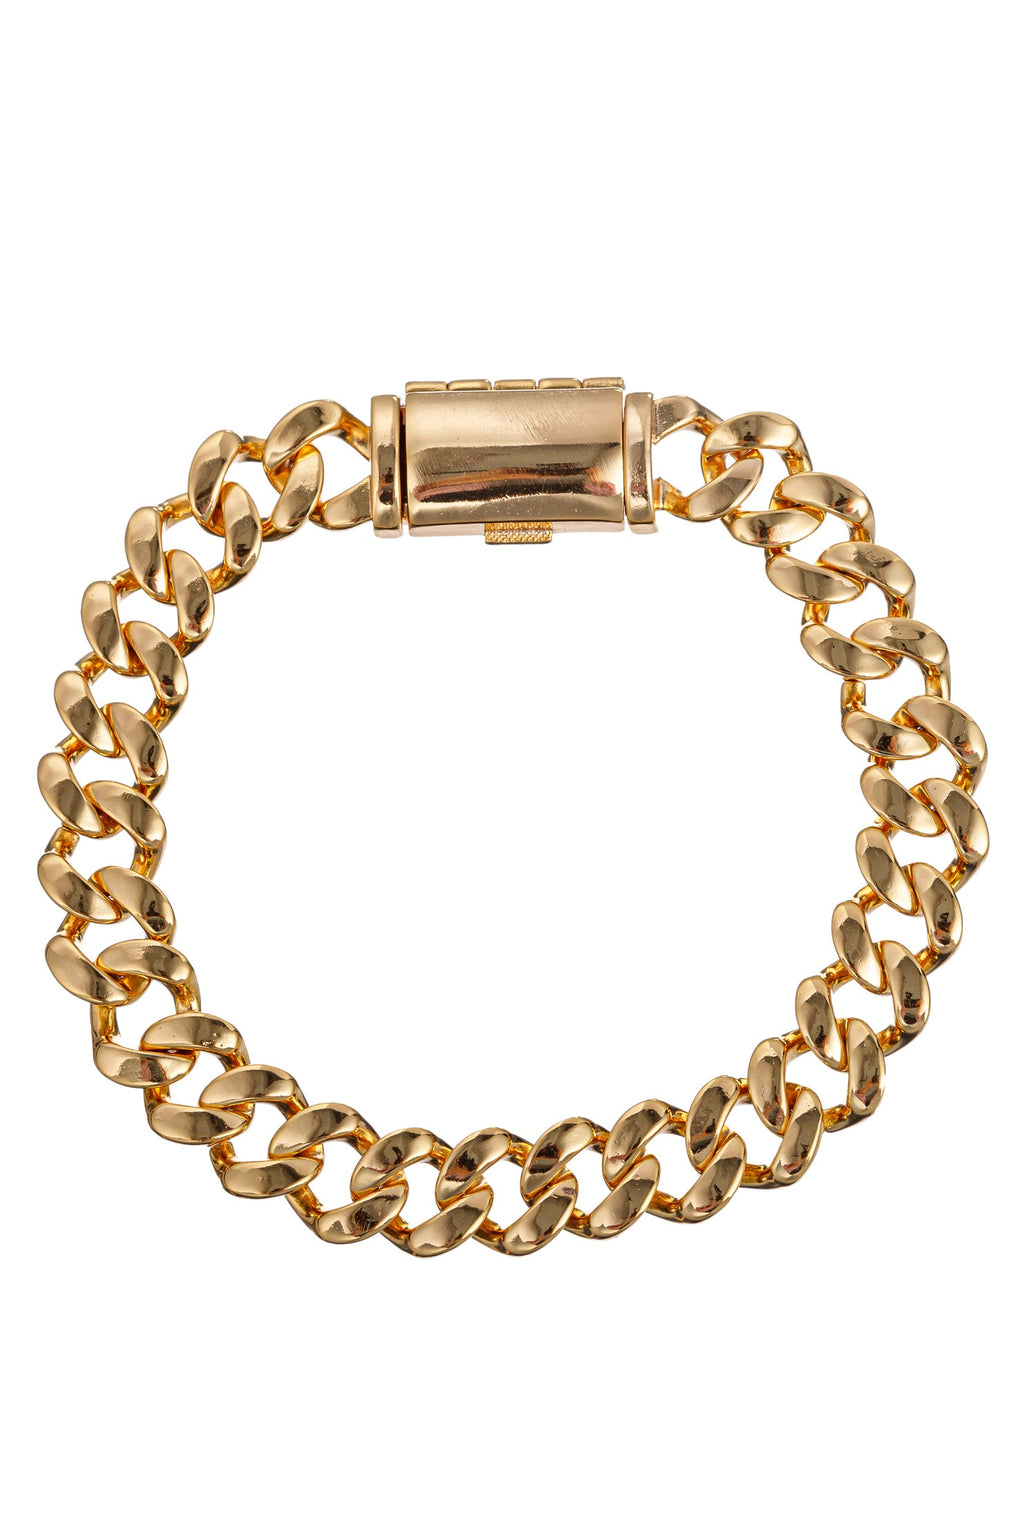 Elevate Your Style with the Faustin Cuban Link Chain Bracelet.